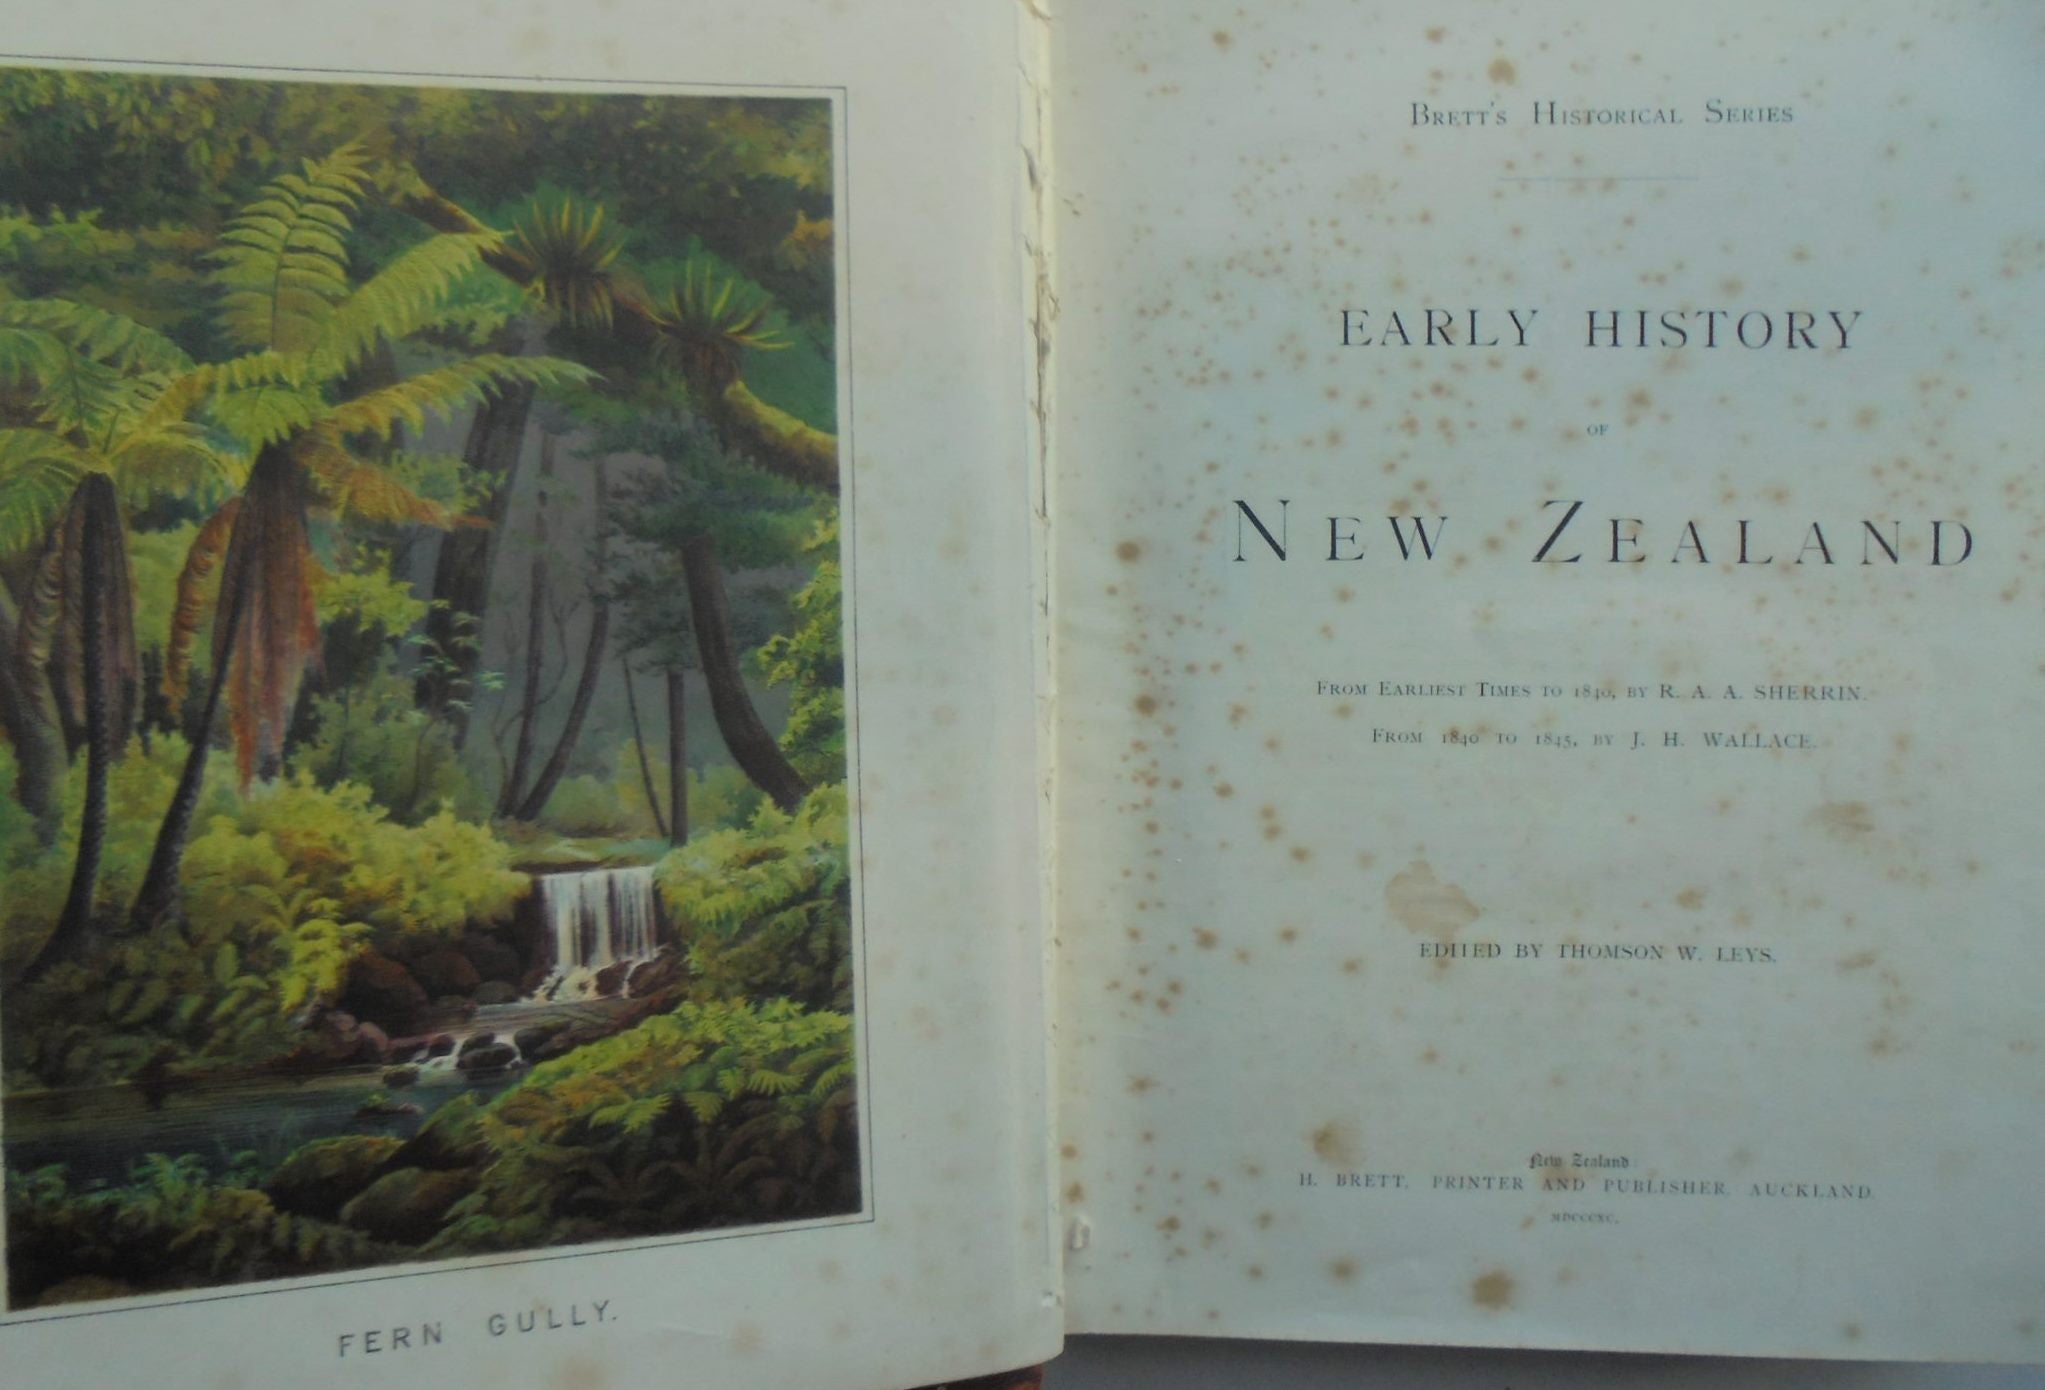 Brett's Historical Series Early History of New Zealand From Earliest Times to 1840, By Sherrin. From 1840 to 1845, By J.H. Wallace.